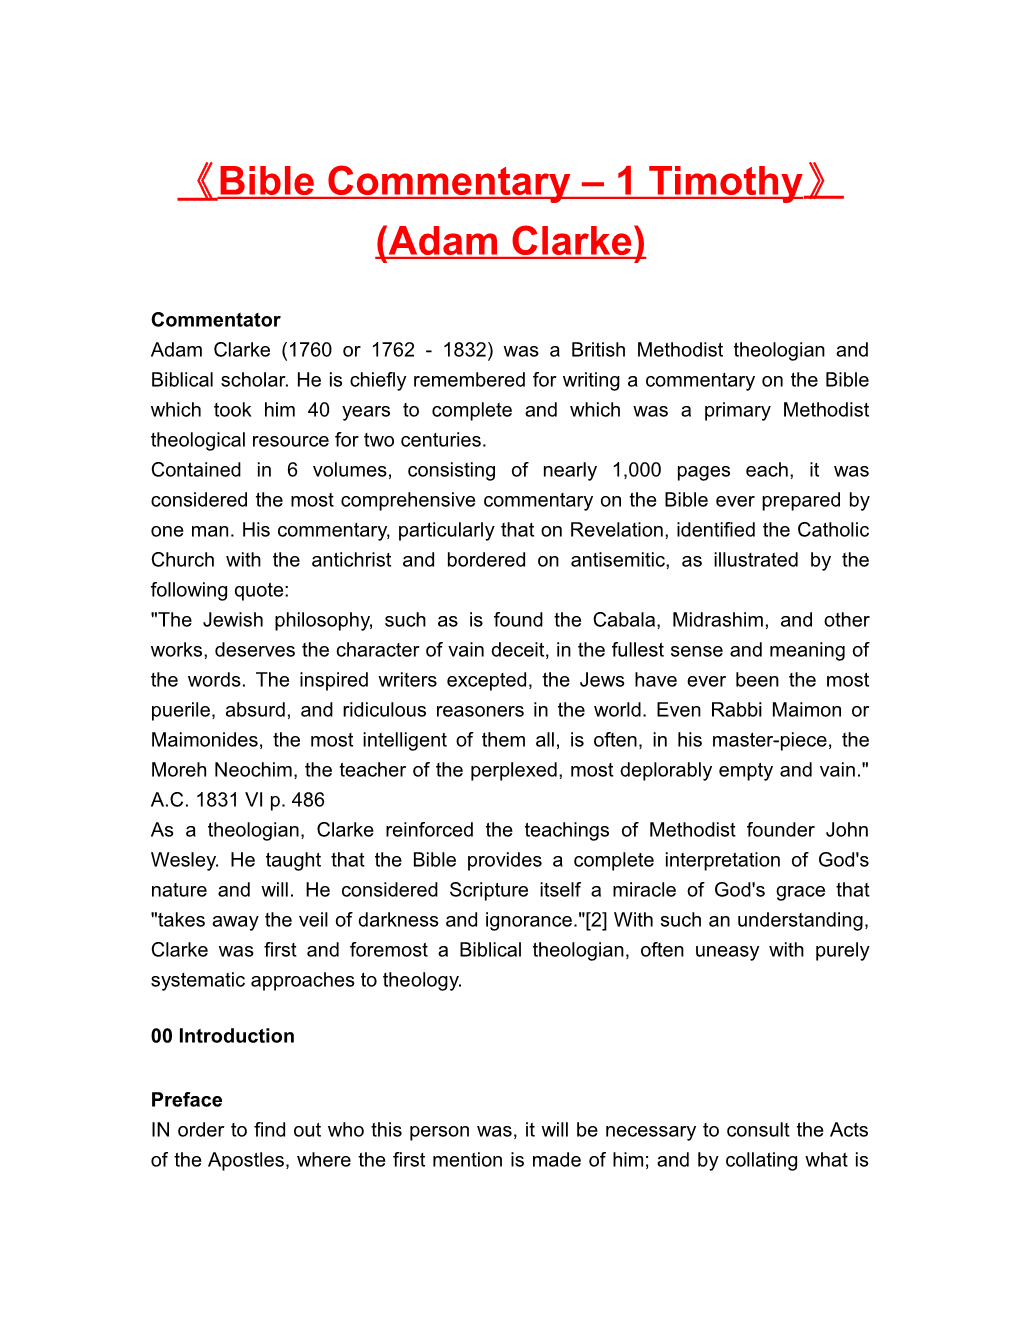 Bible Commentary 1 Timothy (Adam Clarke)